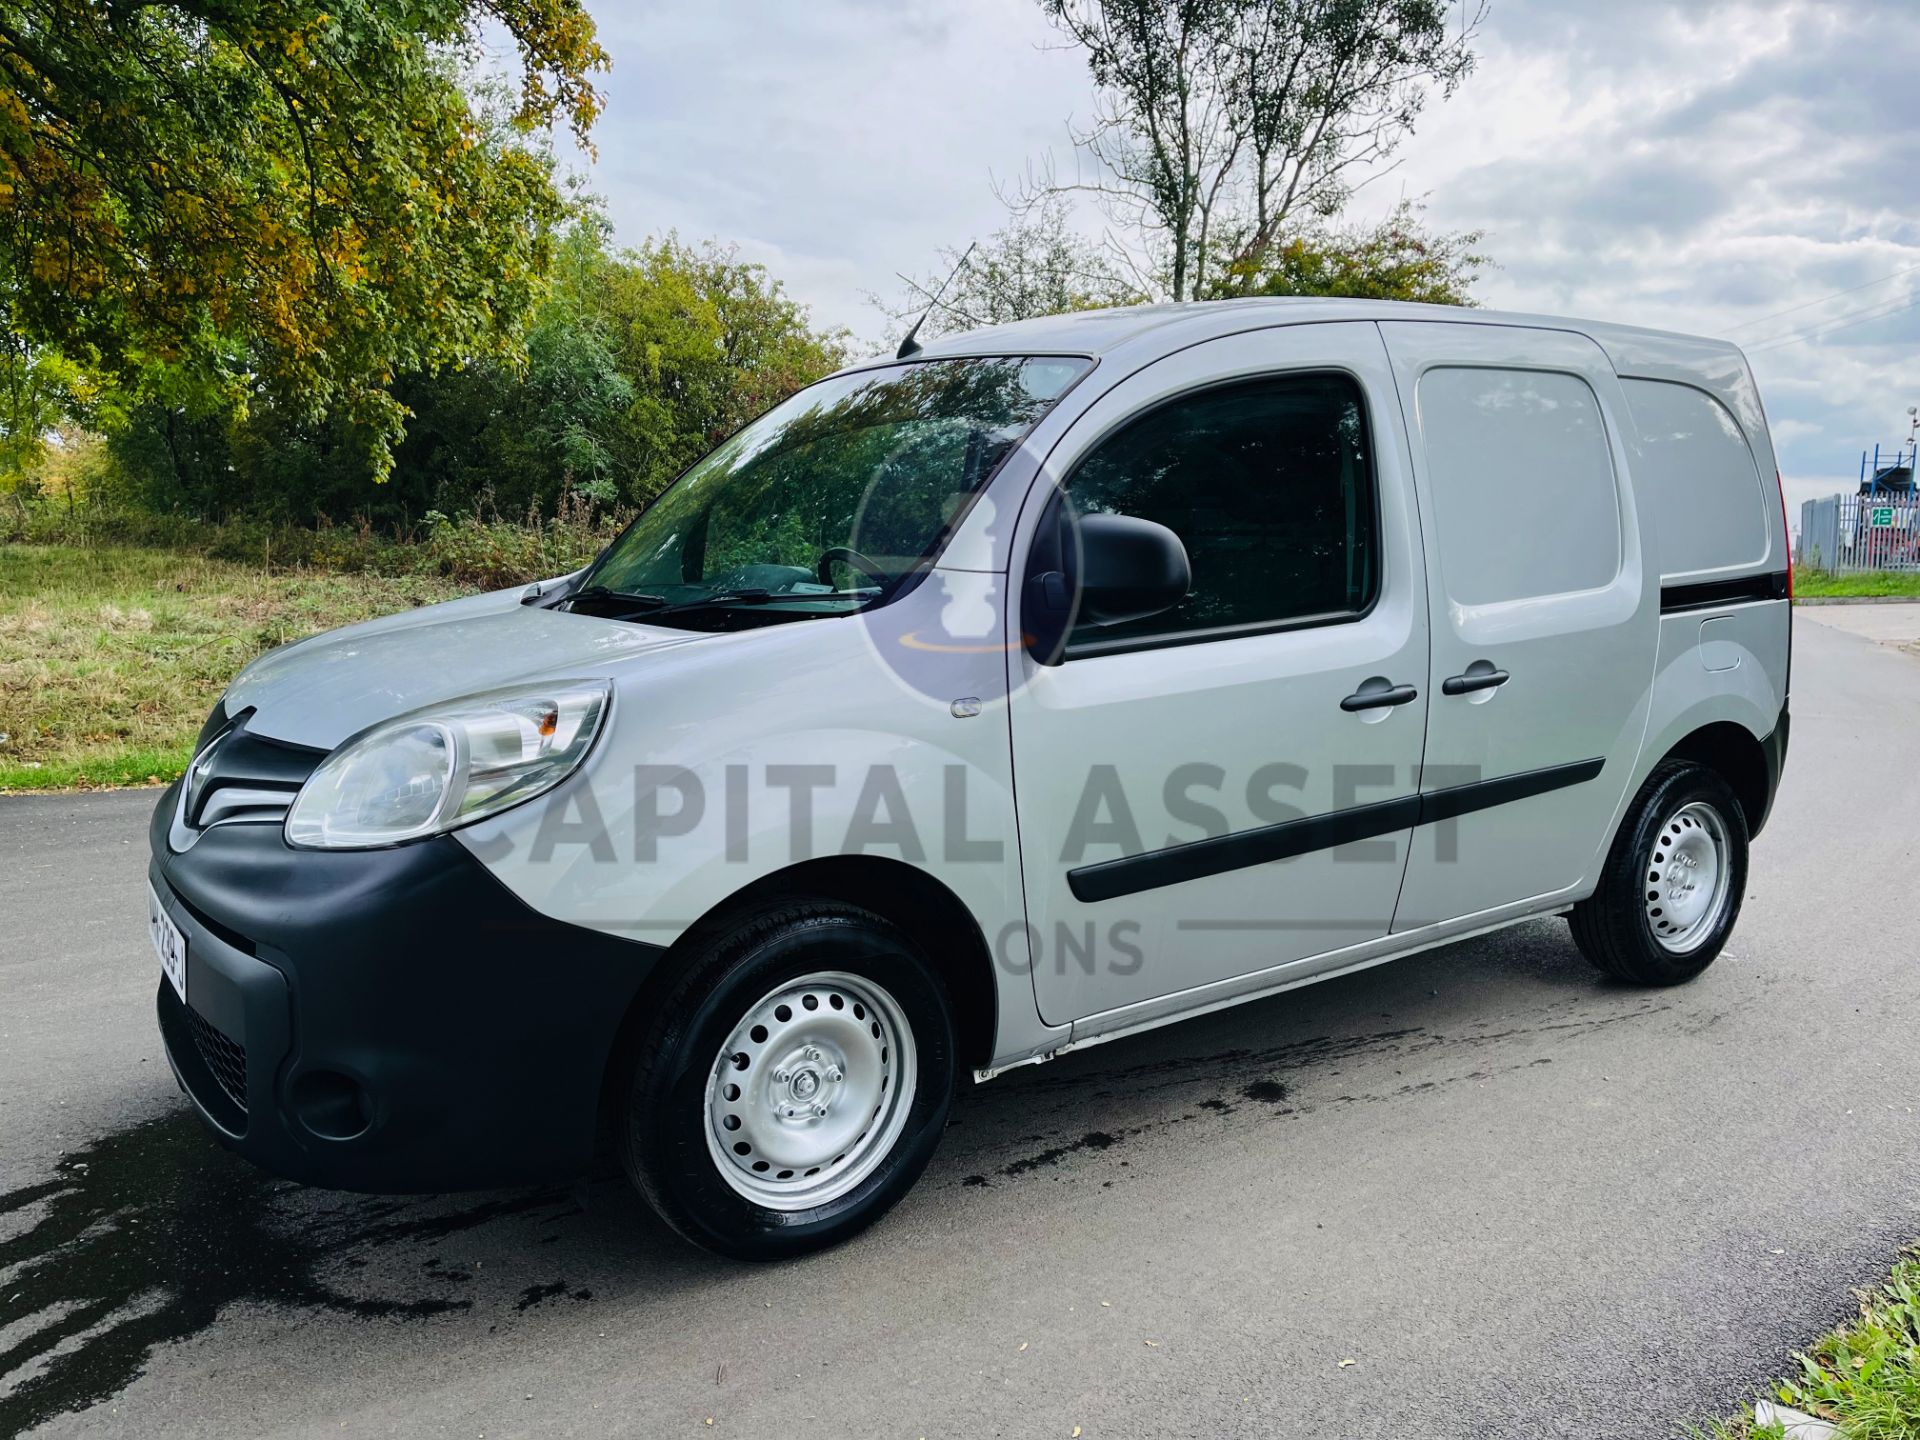 RENAULT KANGOO 1.5DCI "BUSINESS EDITION" 2018 -EURO 6/STOP START (AIR CON) ELEC PACK-TWIN SIDE DOORS - Image 2 of 21